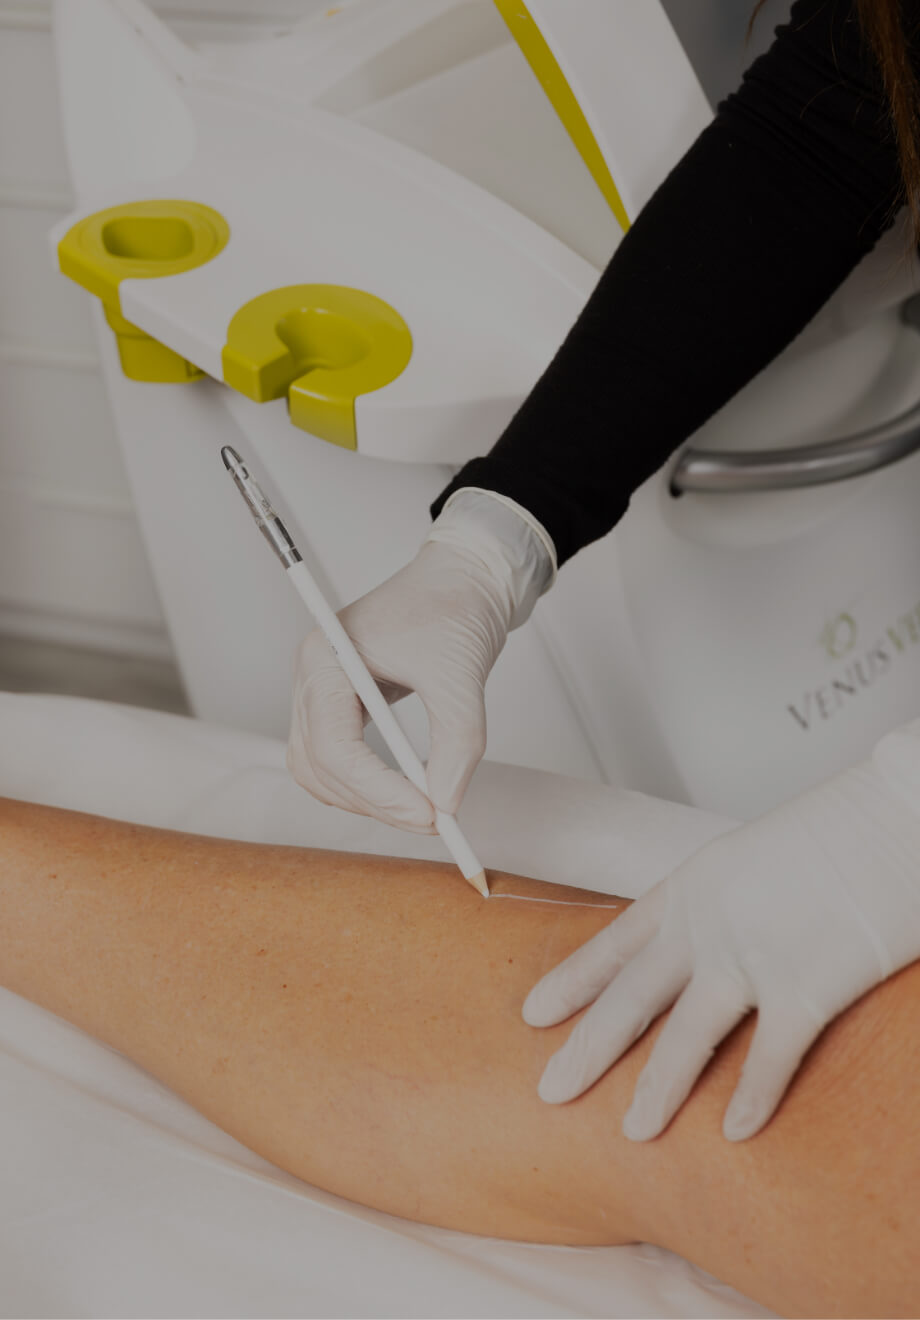 A Clinique Chloé technician delimiting the area to be treated for permanent hair removal with IPL on a woman's leg